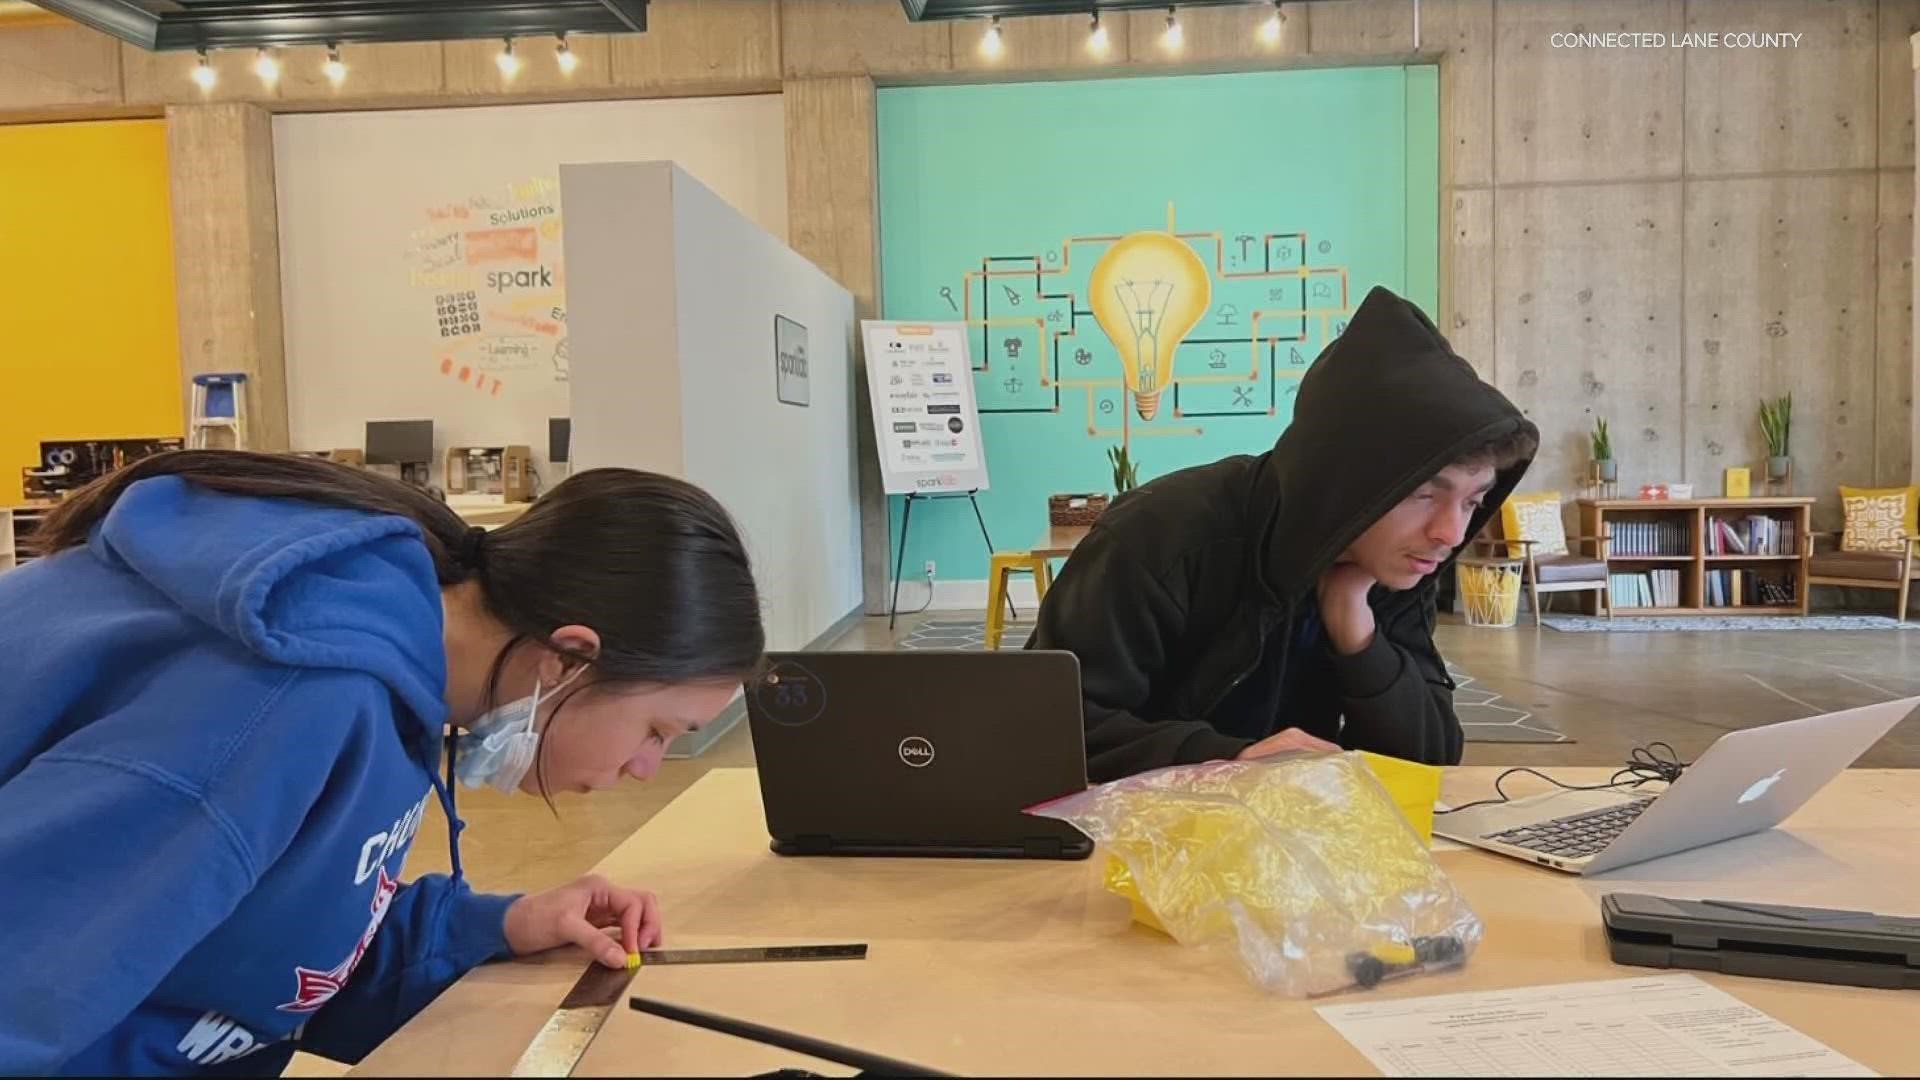 Oregon Stem received a $500,000 grant to connect young people to STEM learning, focusing on historically underserved students.